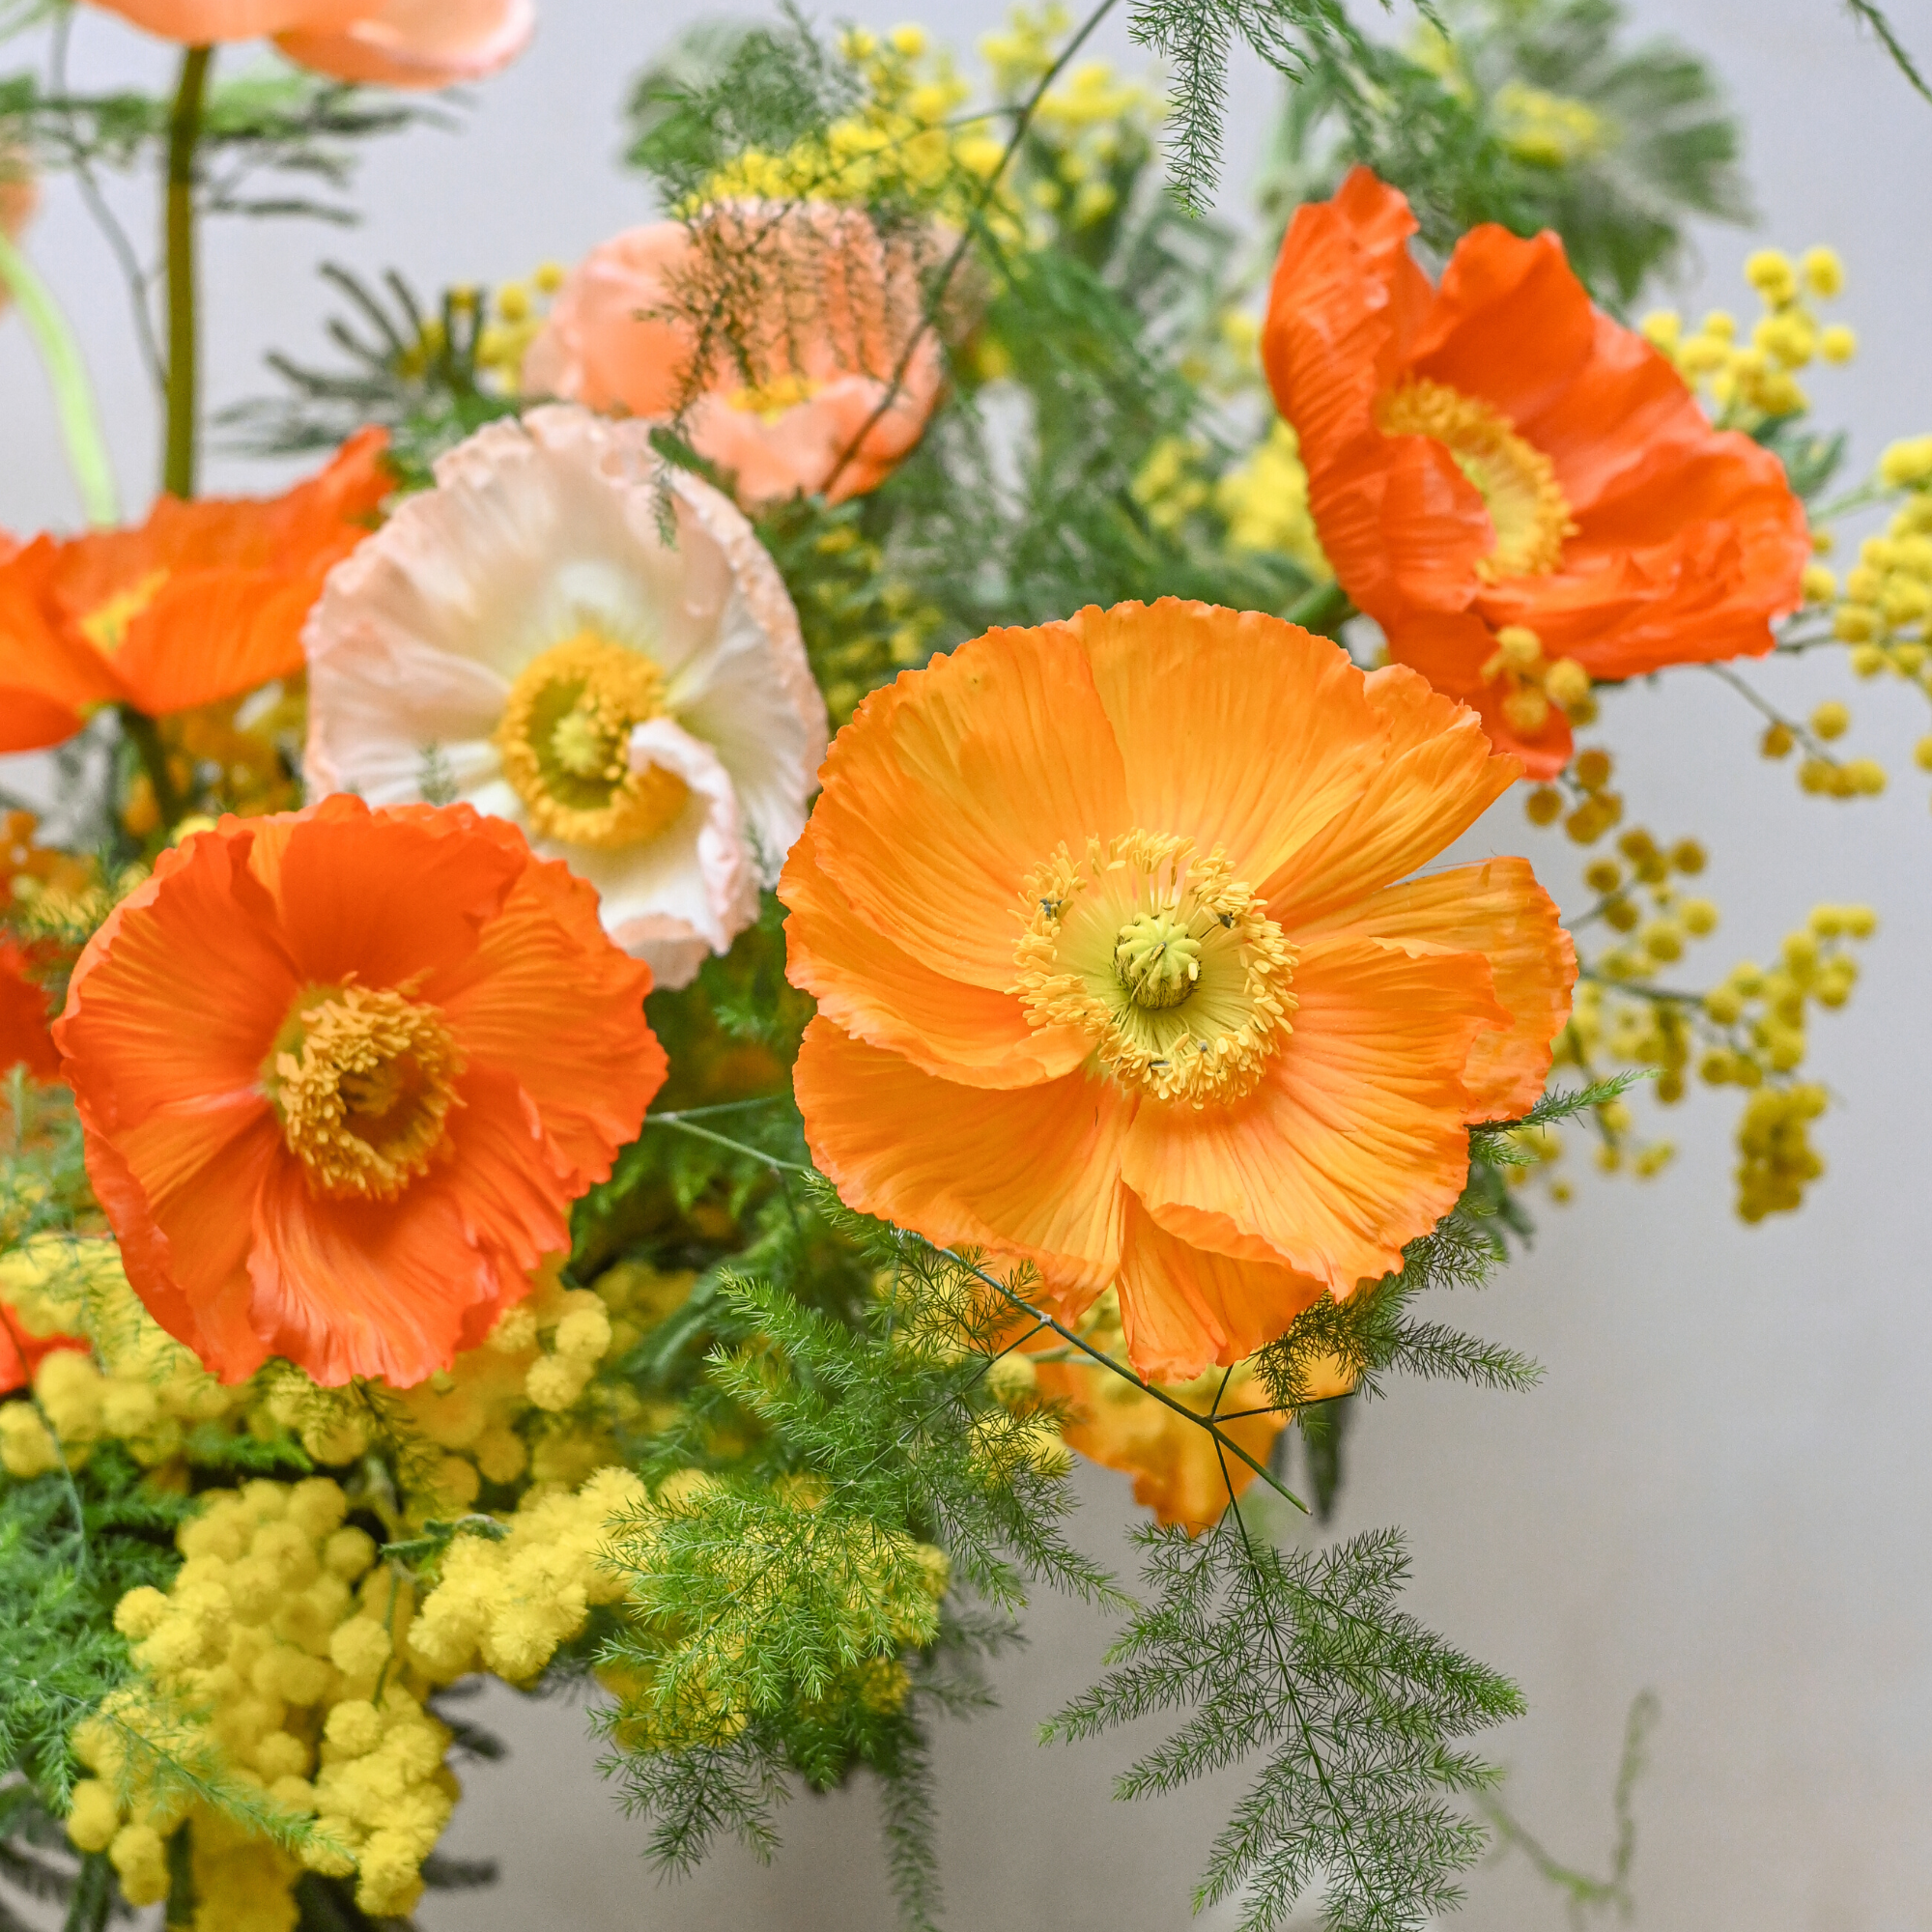 icelandic poppies and mimosa fresh flowers bouquet available for London & UK flower delivery